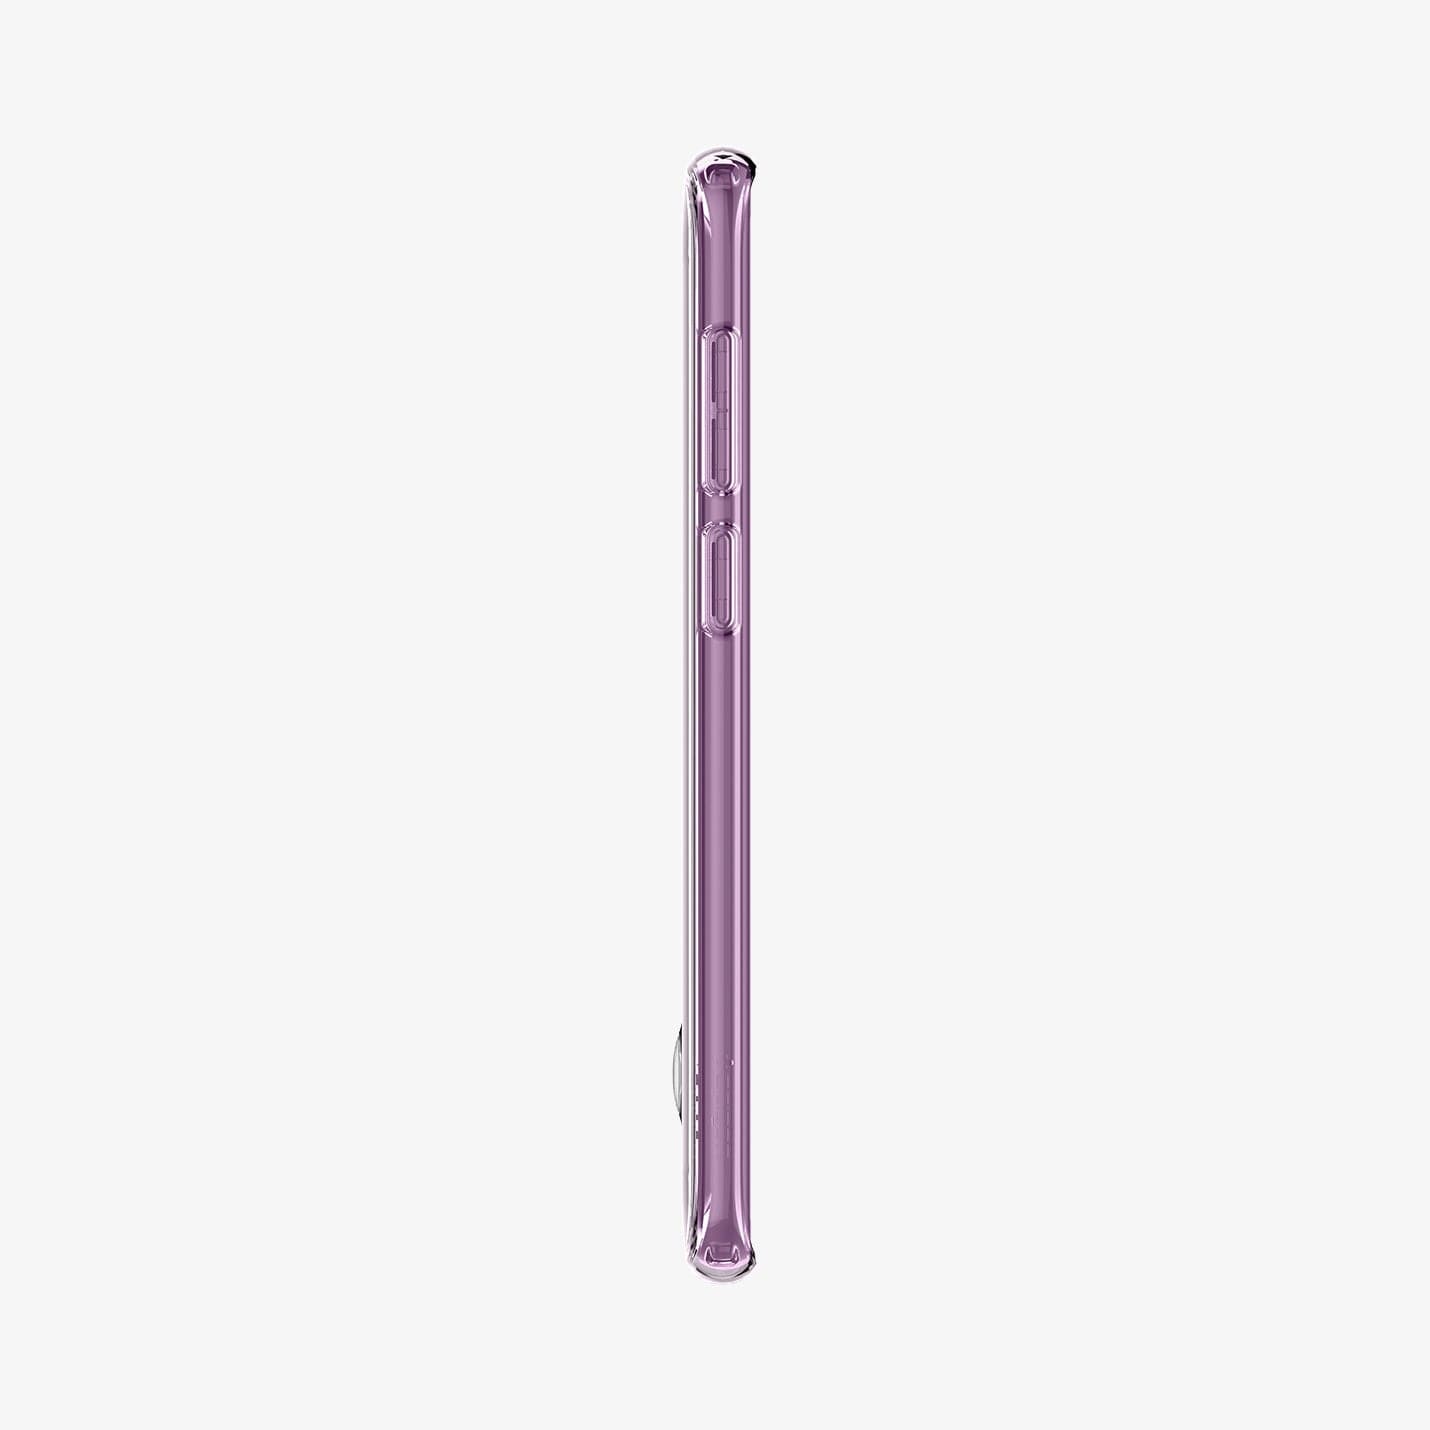 592CS22841 - Galaxy S9 Series Ultra Hybrid S Case in crystal clear showing the side